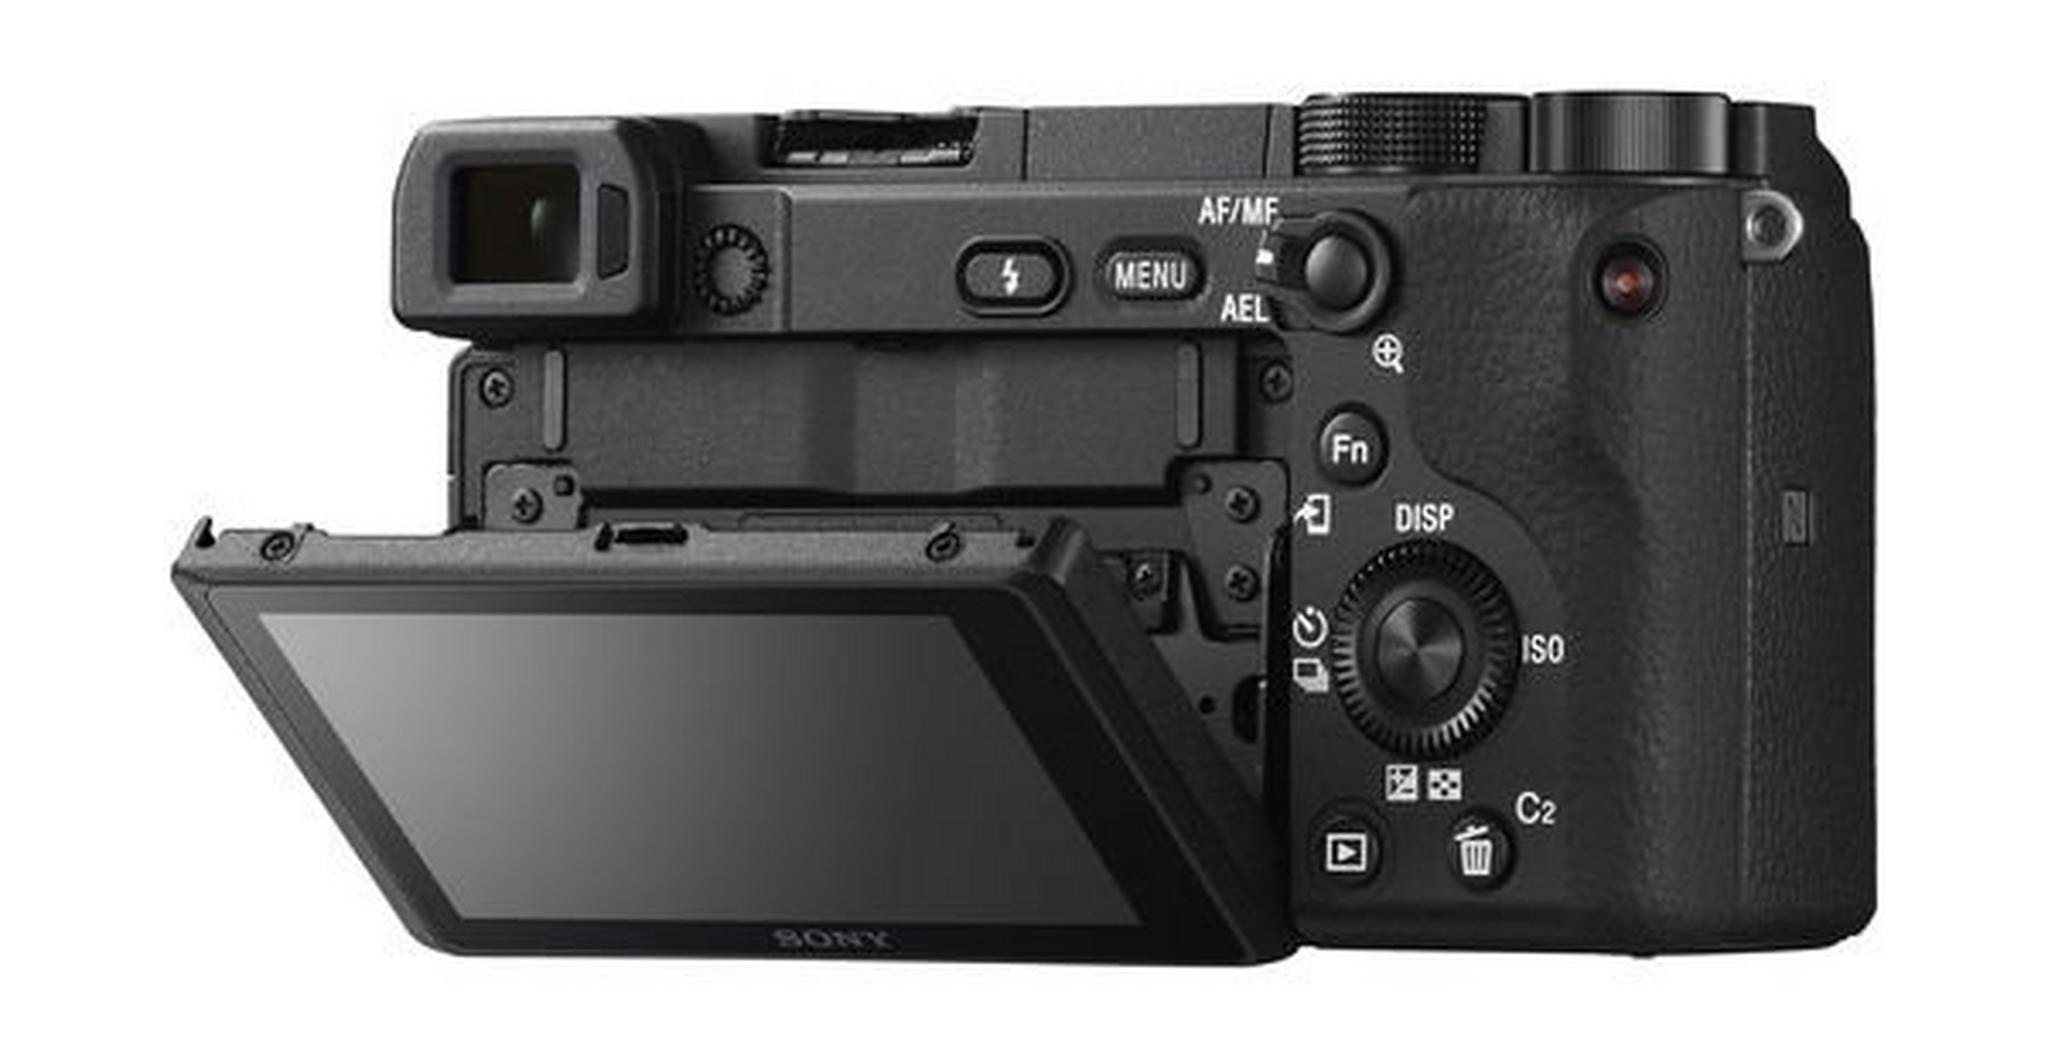 SONY A6400 24.2MP Mirrorless Camera - Body Only